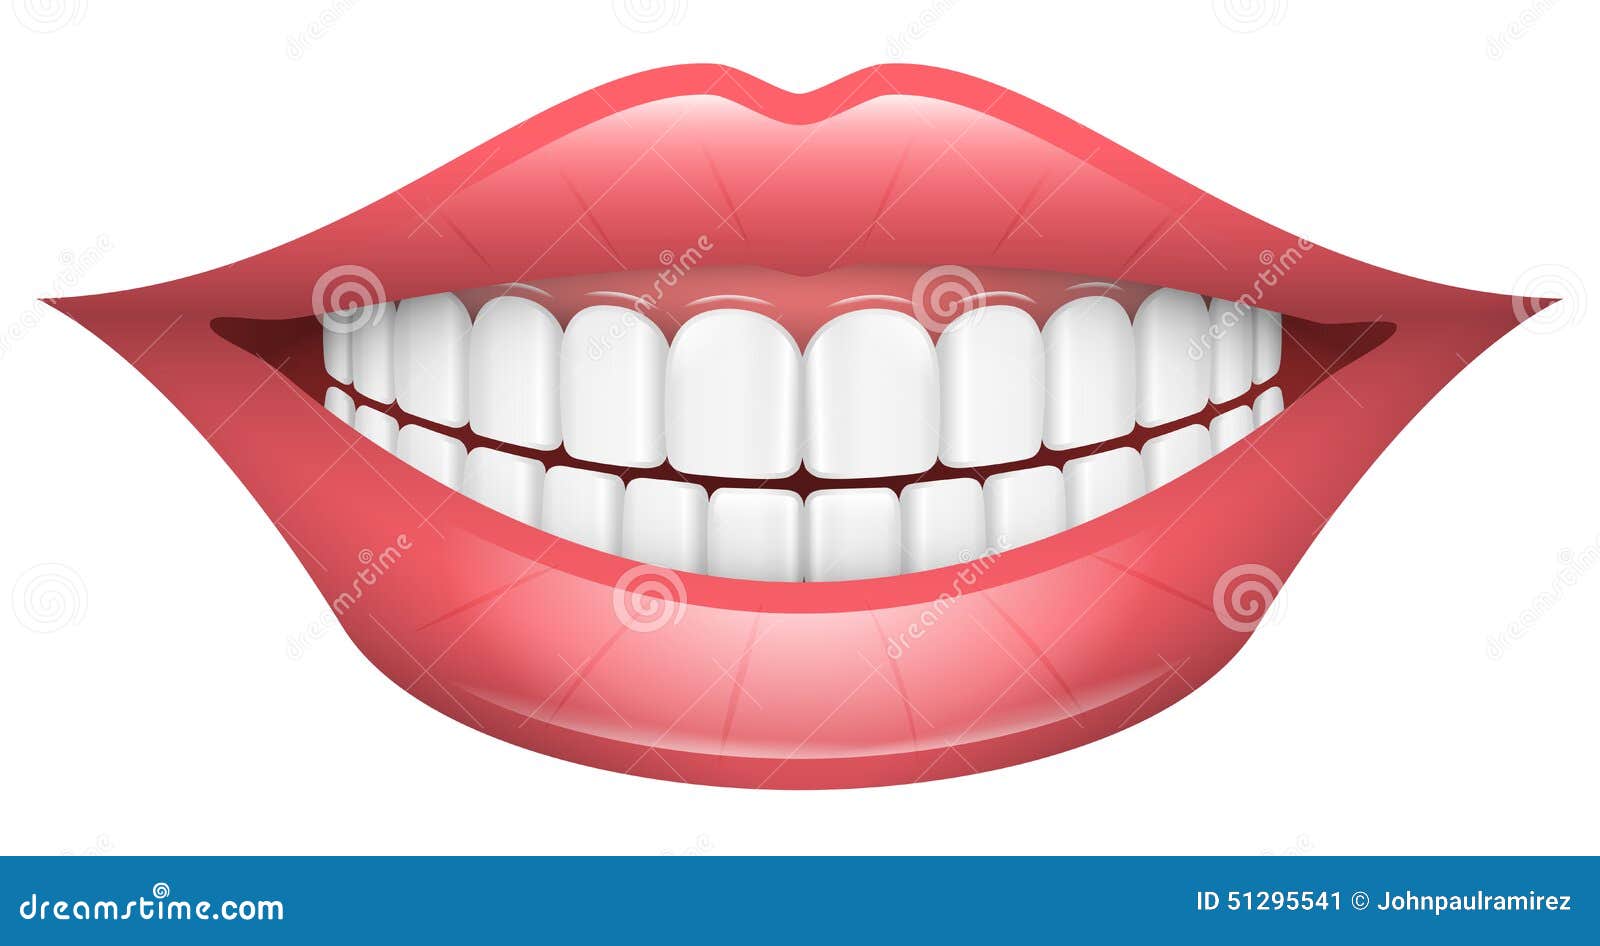 clipart of teeth and lips - photo #22